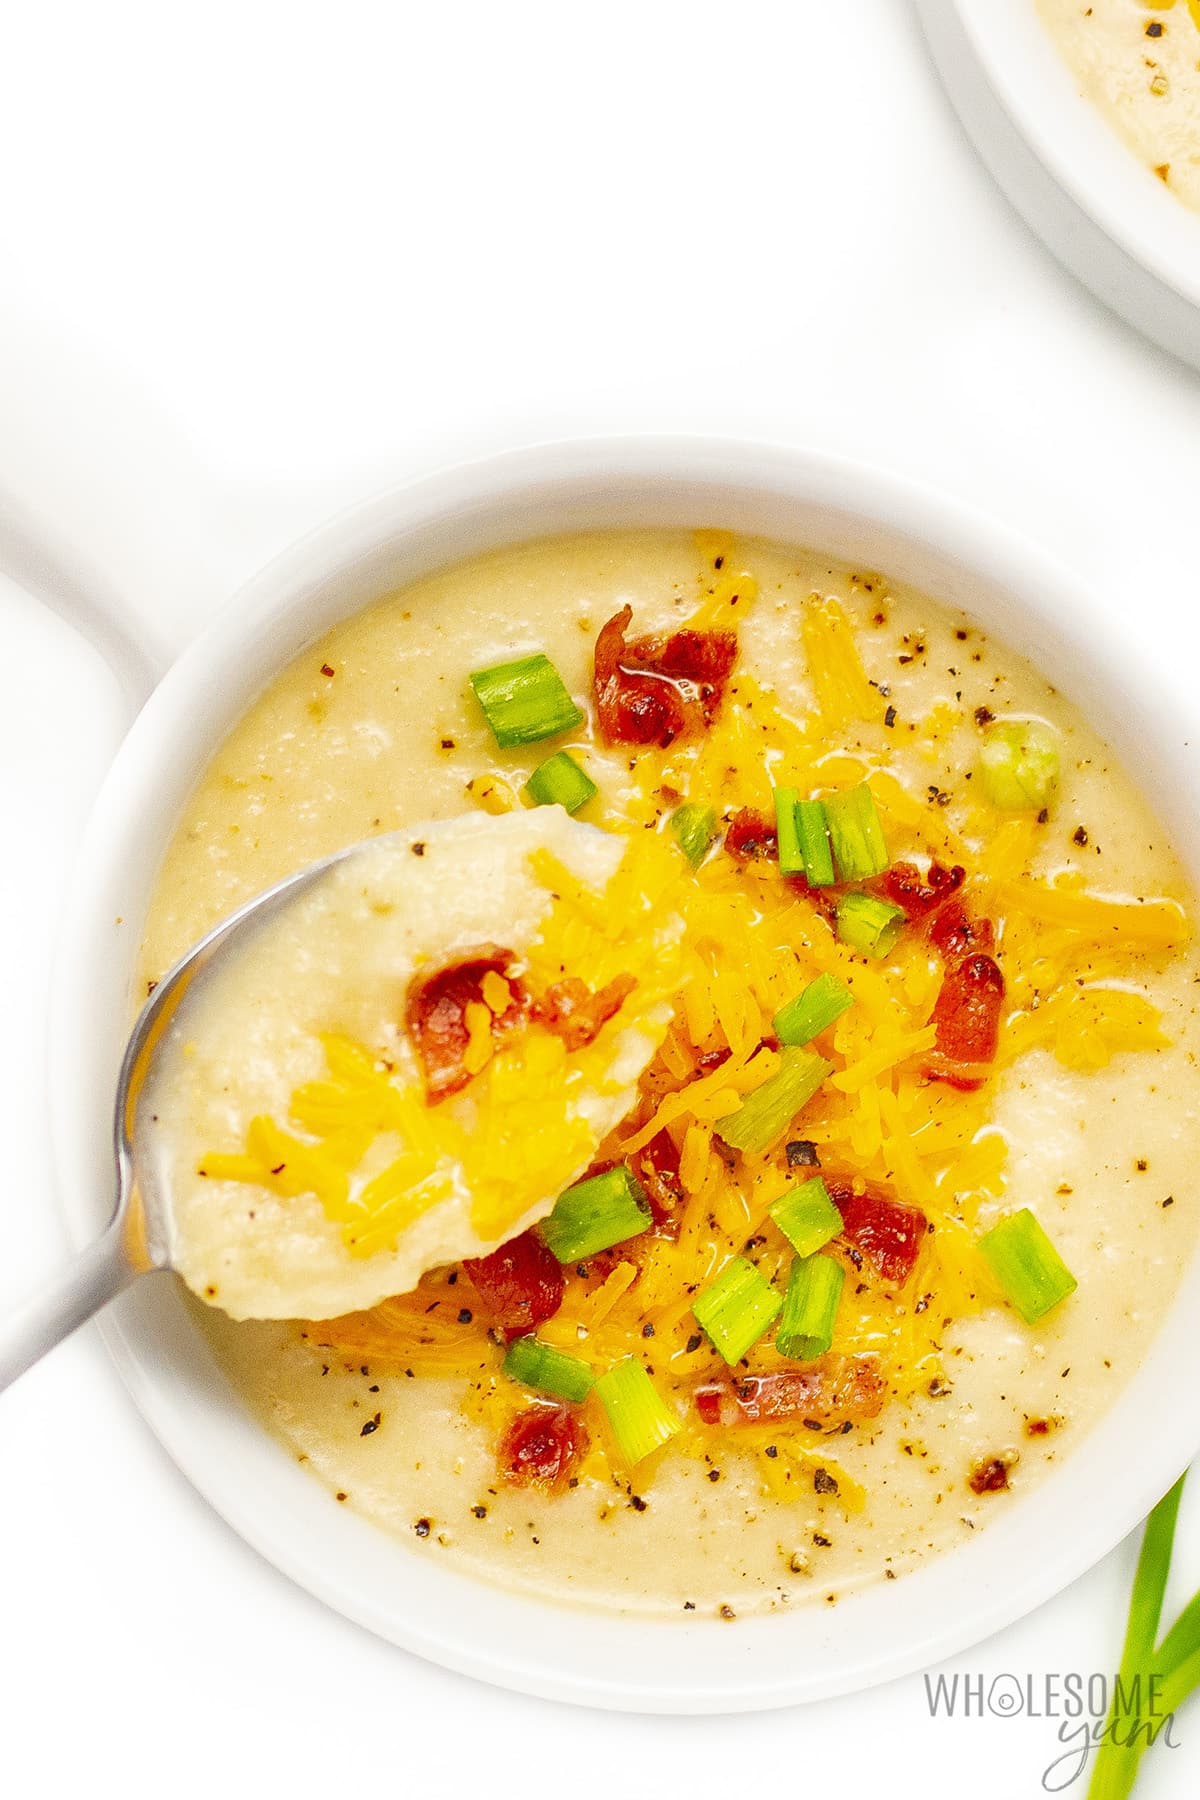 Celery root soup in bowls.